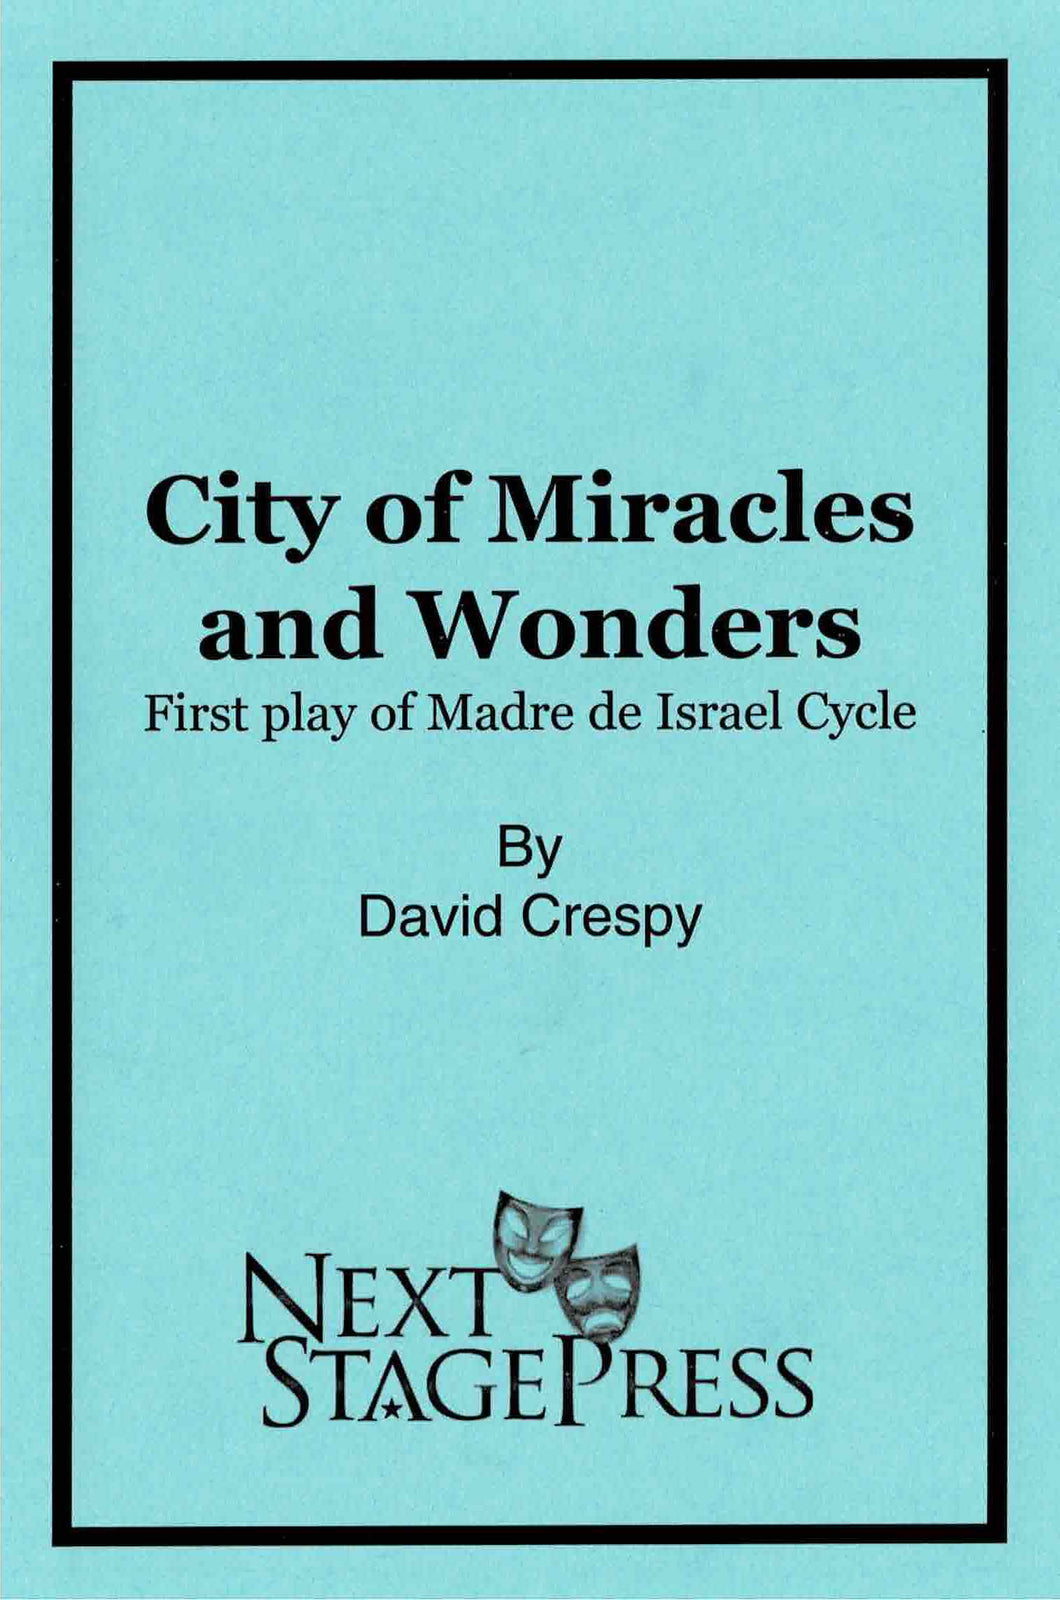 City of Miracles and Wonders